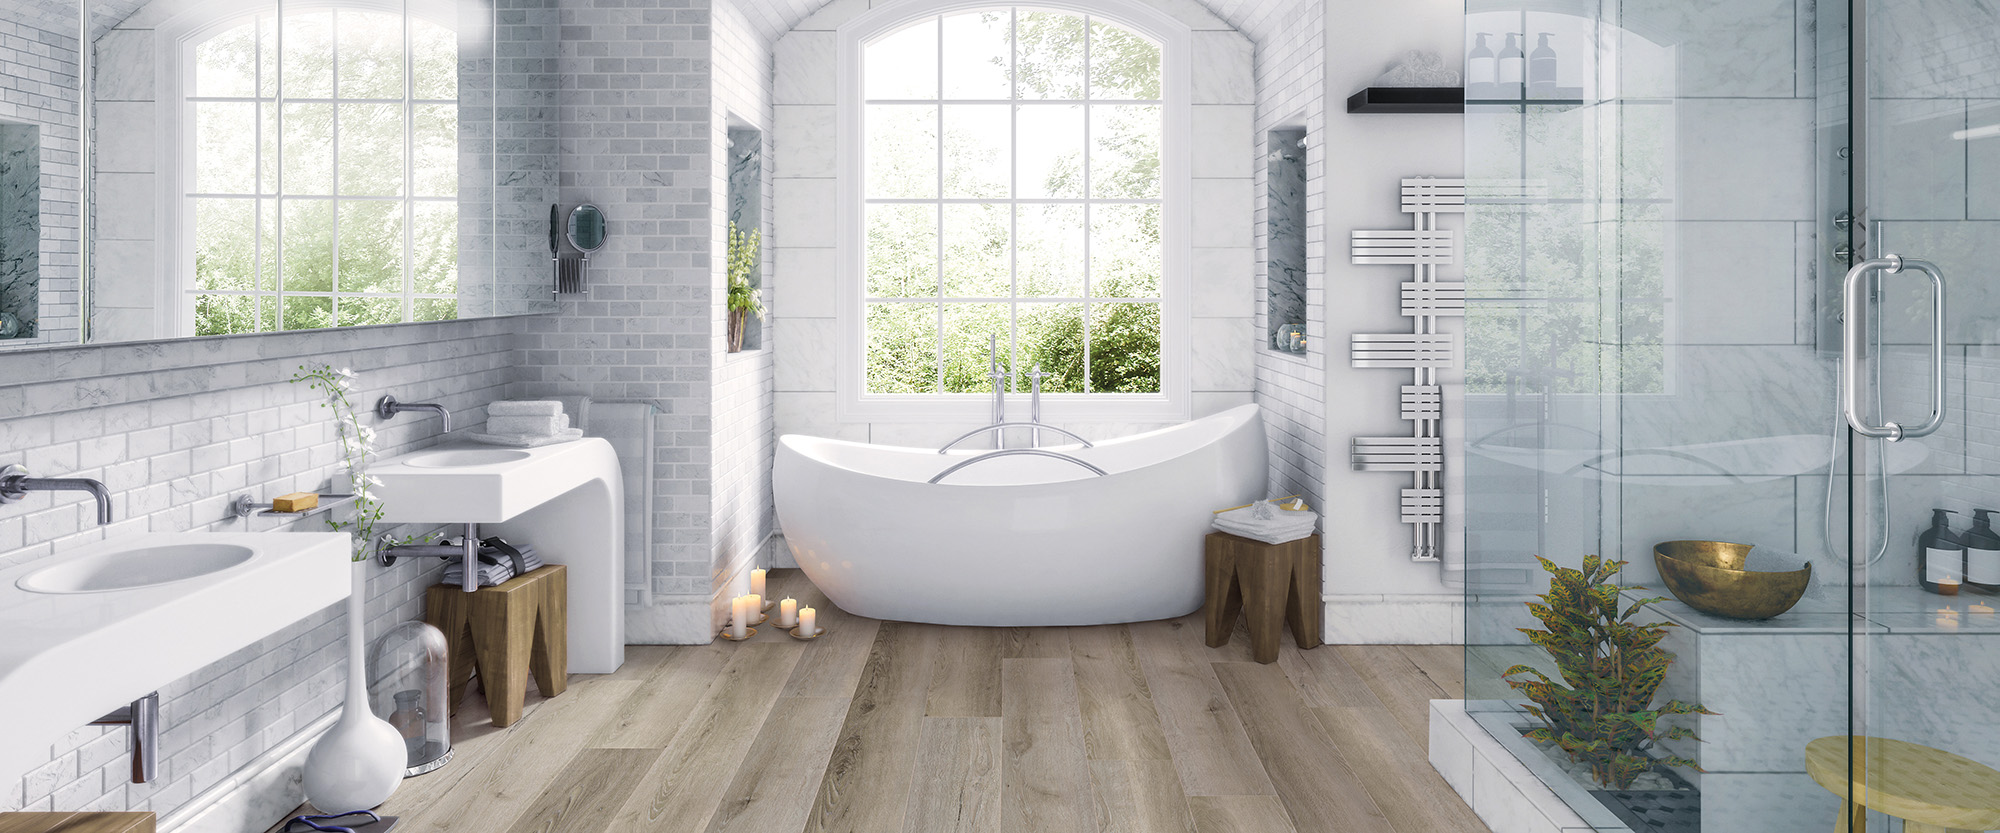 white bathroom resilient flooring eco-friendly durable white bleached oak wood like flooring for home long lasting durable